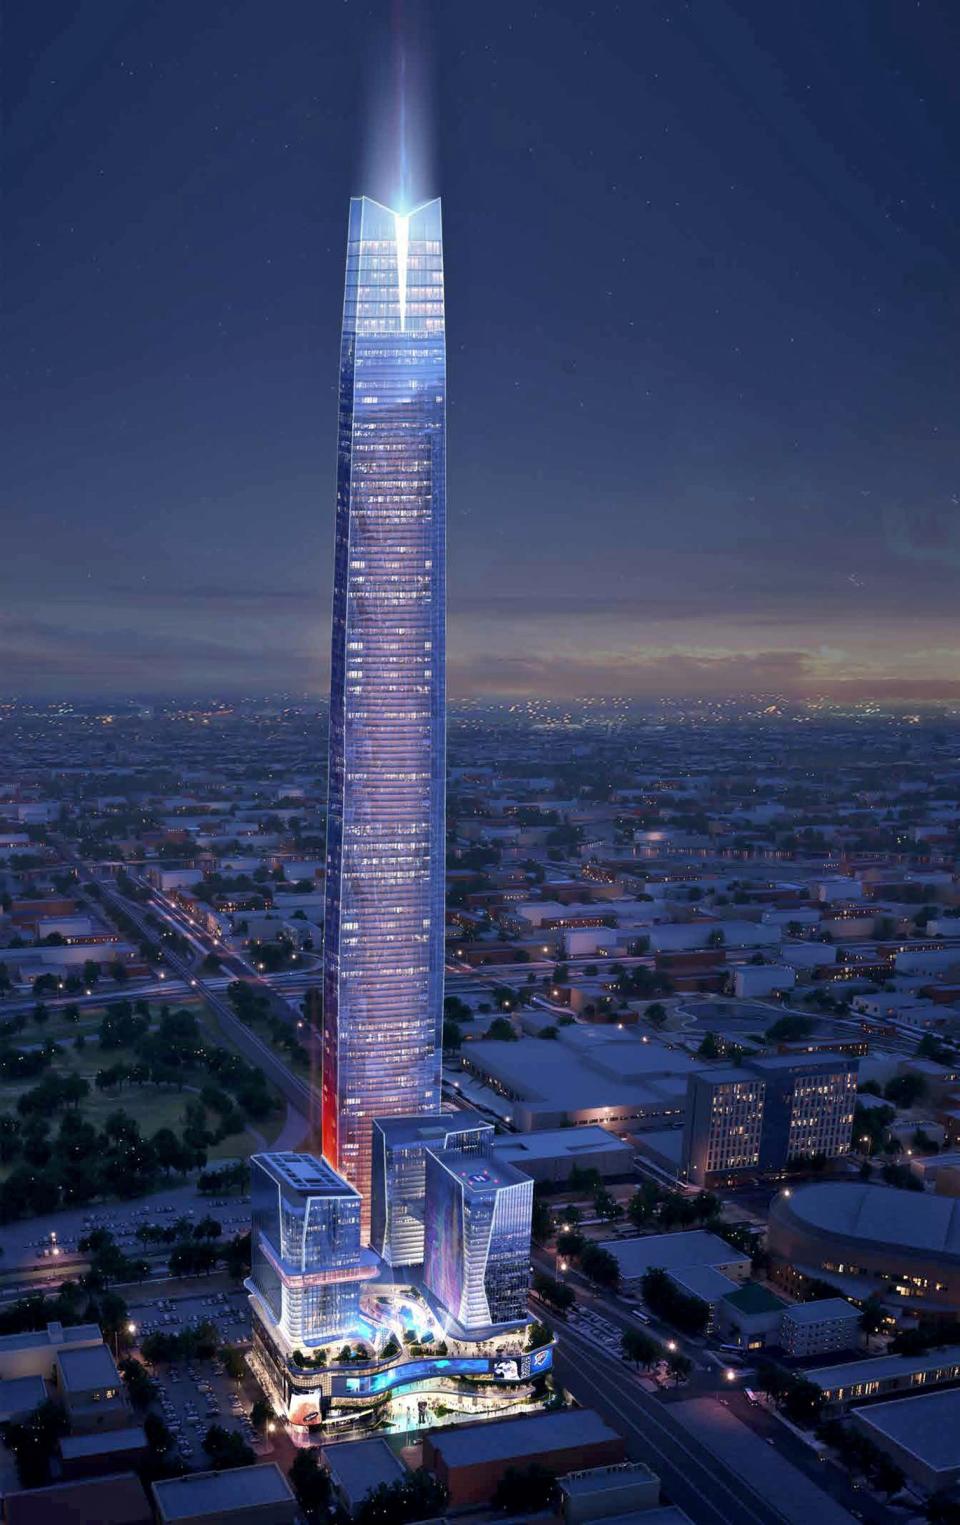 A zoning application being filed with Oklahoma City later this month seeks permission to build a residential tower in Lower Bricktown that would be twice the size of Devon Energy Center and the tallest in the United States.